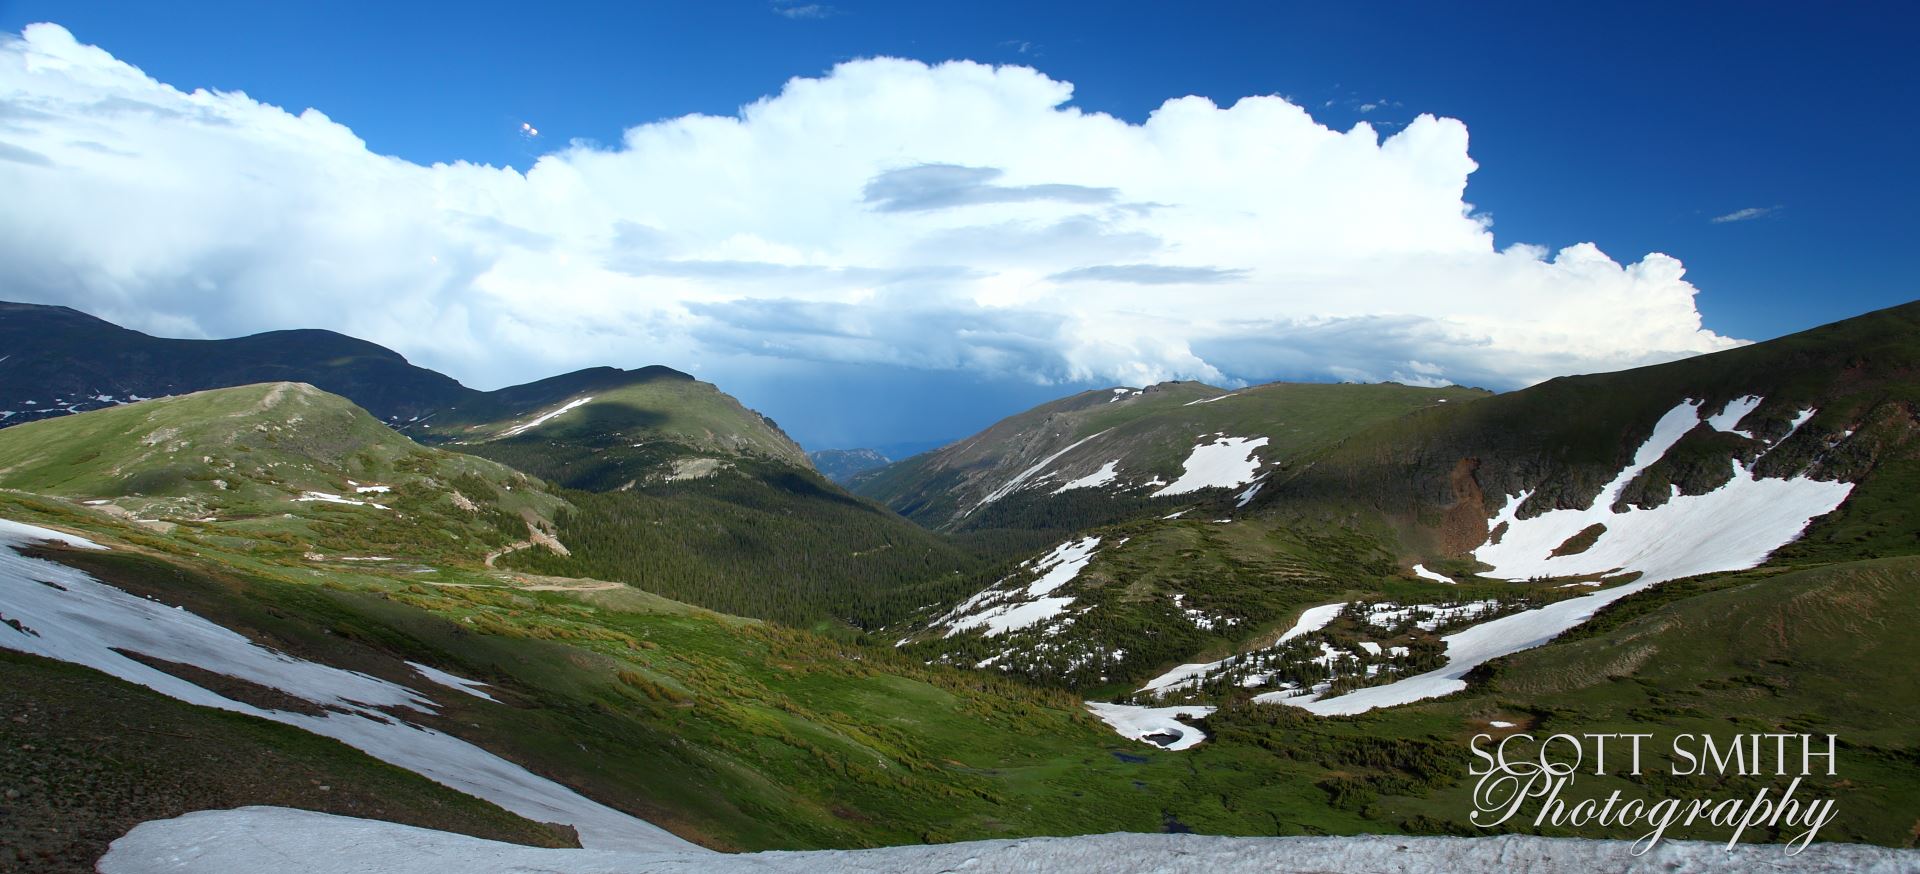 Trail Ridge View - From the top of Trail Ridge Road, in Rocky Mountain National Park. by Scott Smith Photos